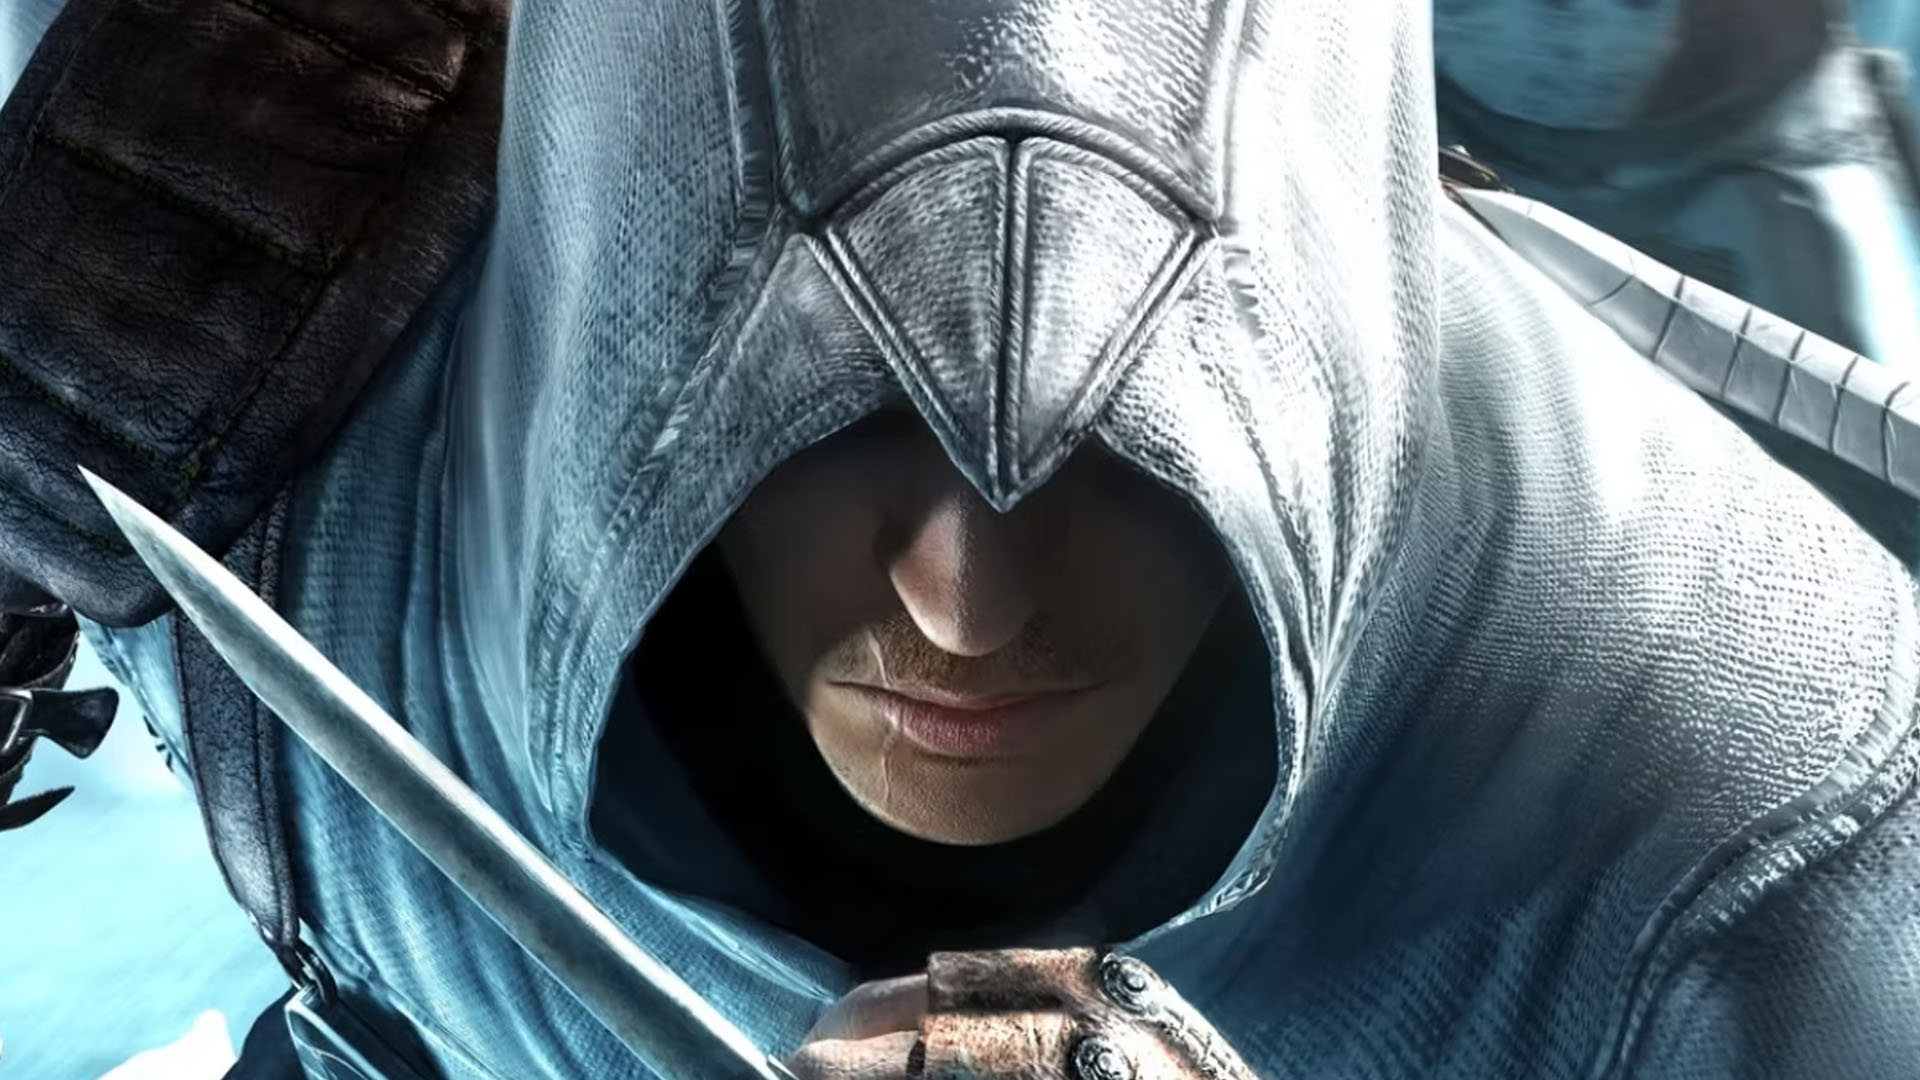 Ubisoft confirms older Assassin’s Creed games will get remakes